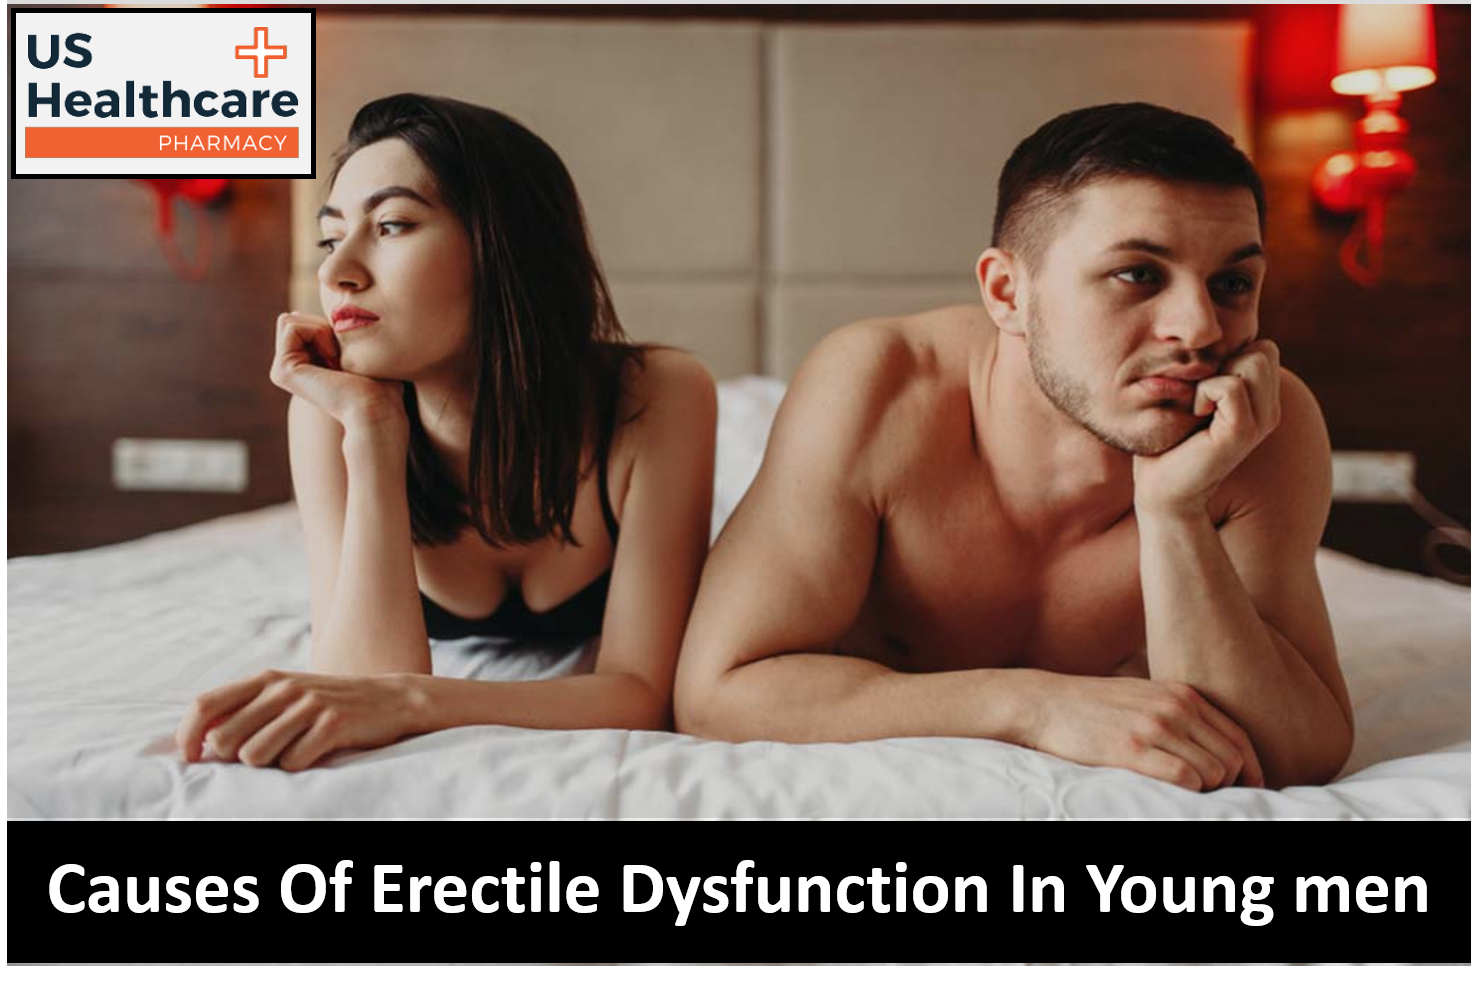 Causes of erectile dysfunction in young men